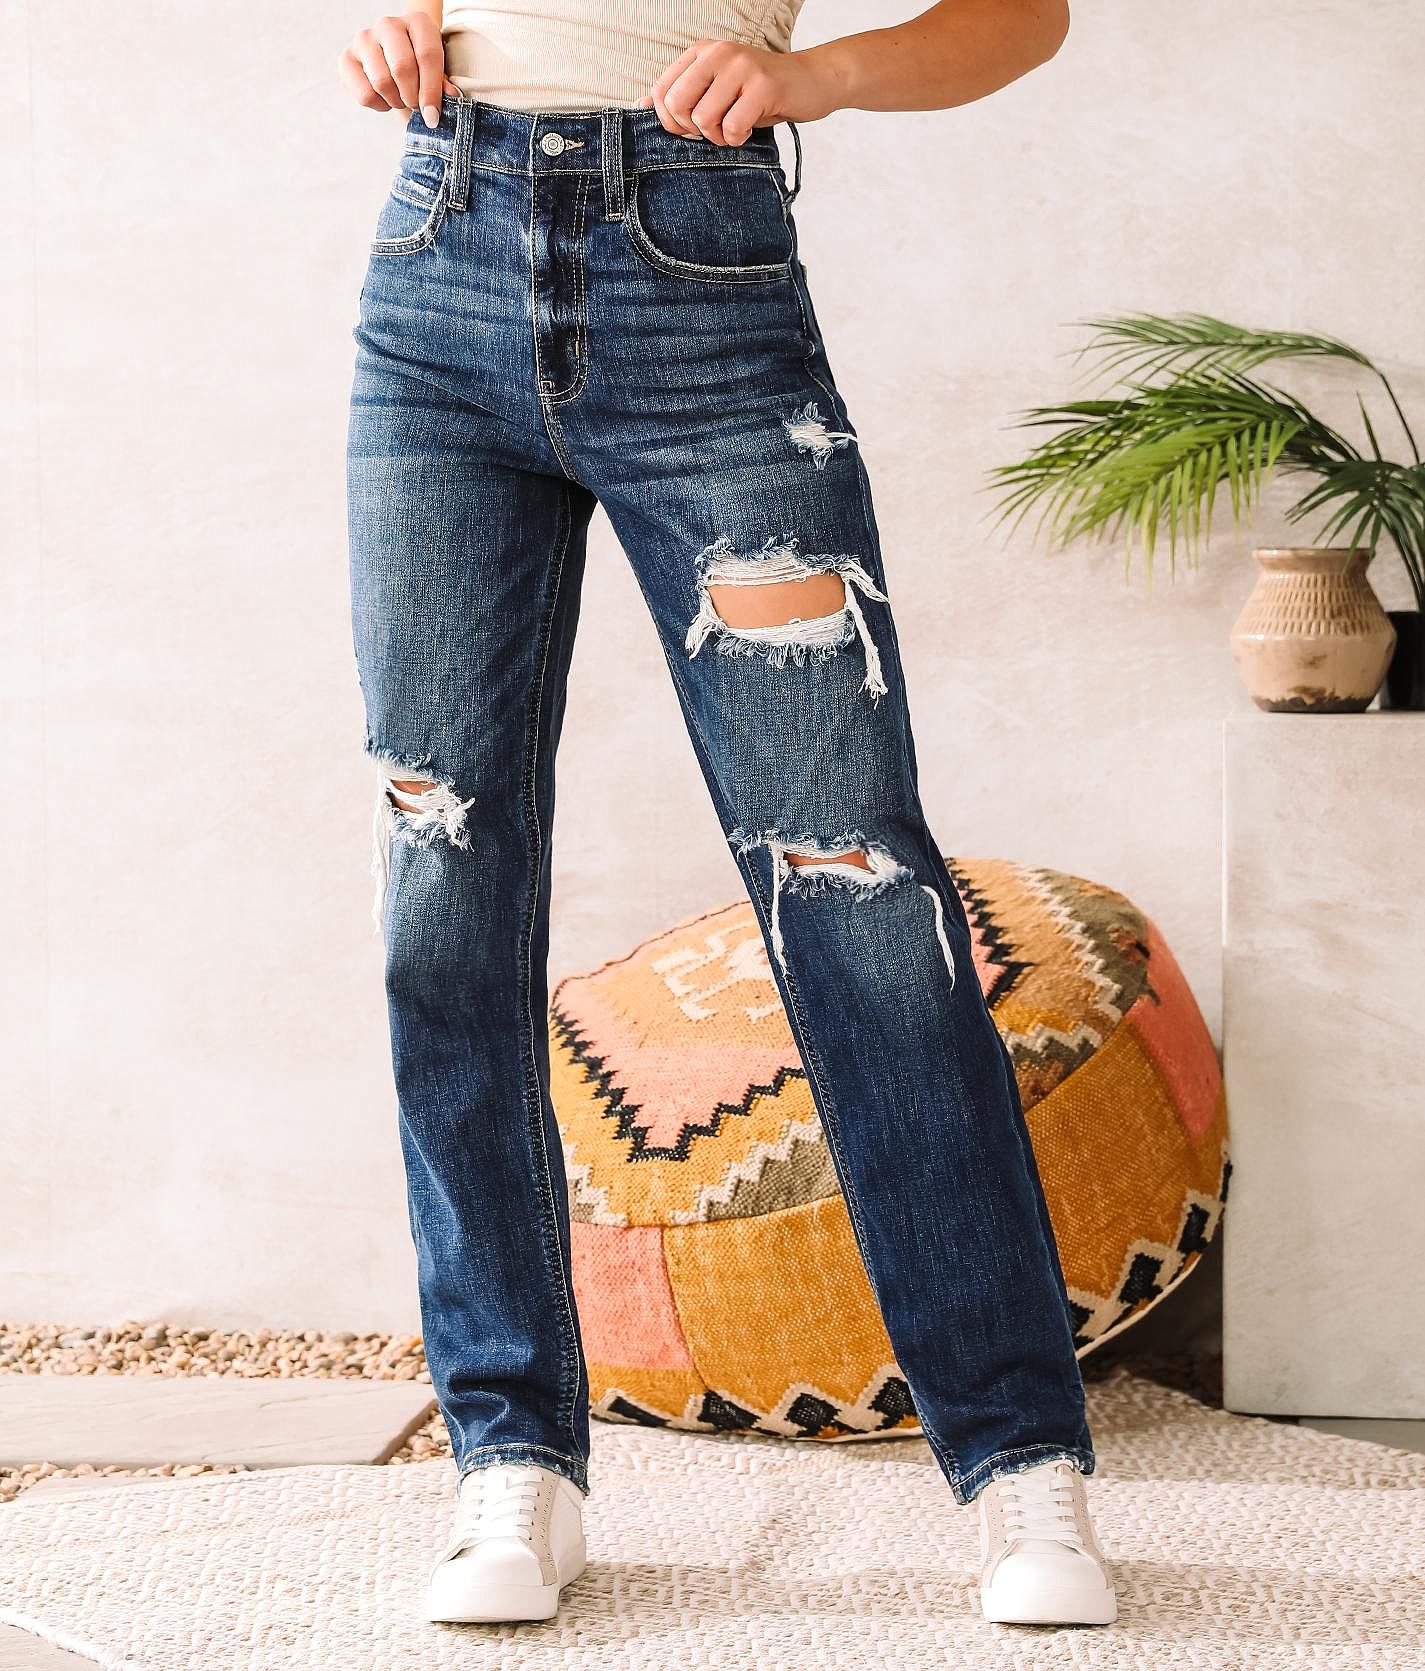 16 Trendy Denim Styles to Try This Fall | Who What Wear